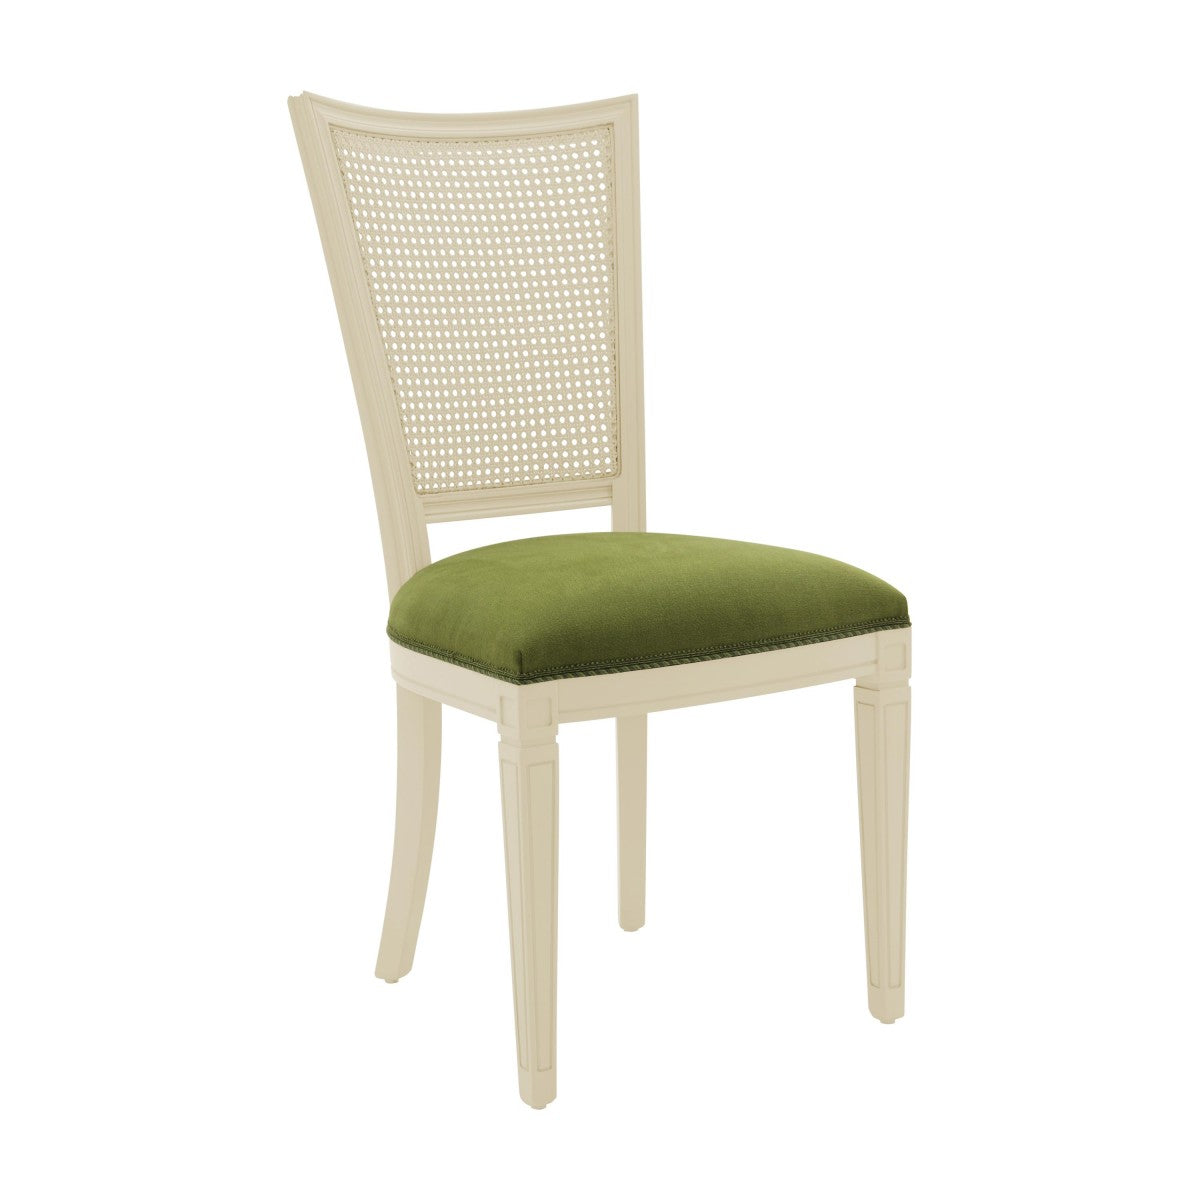 Prague Bespoke Upholstered Classic Dining Chair MS3300S Custom Made To Order